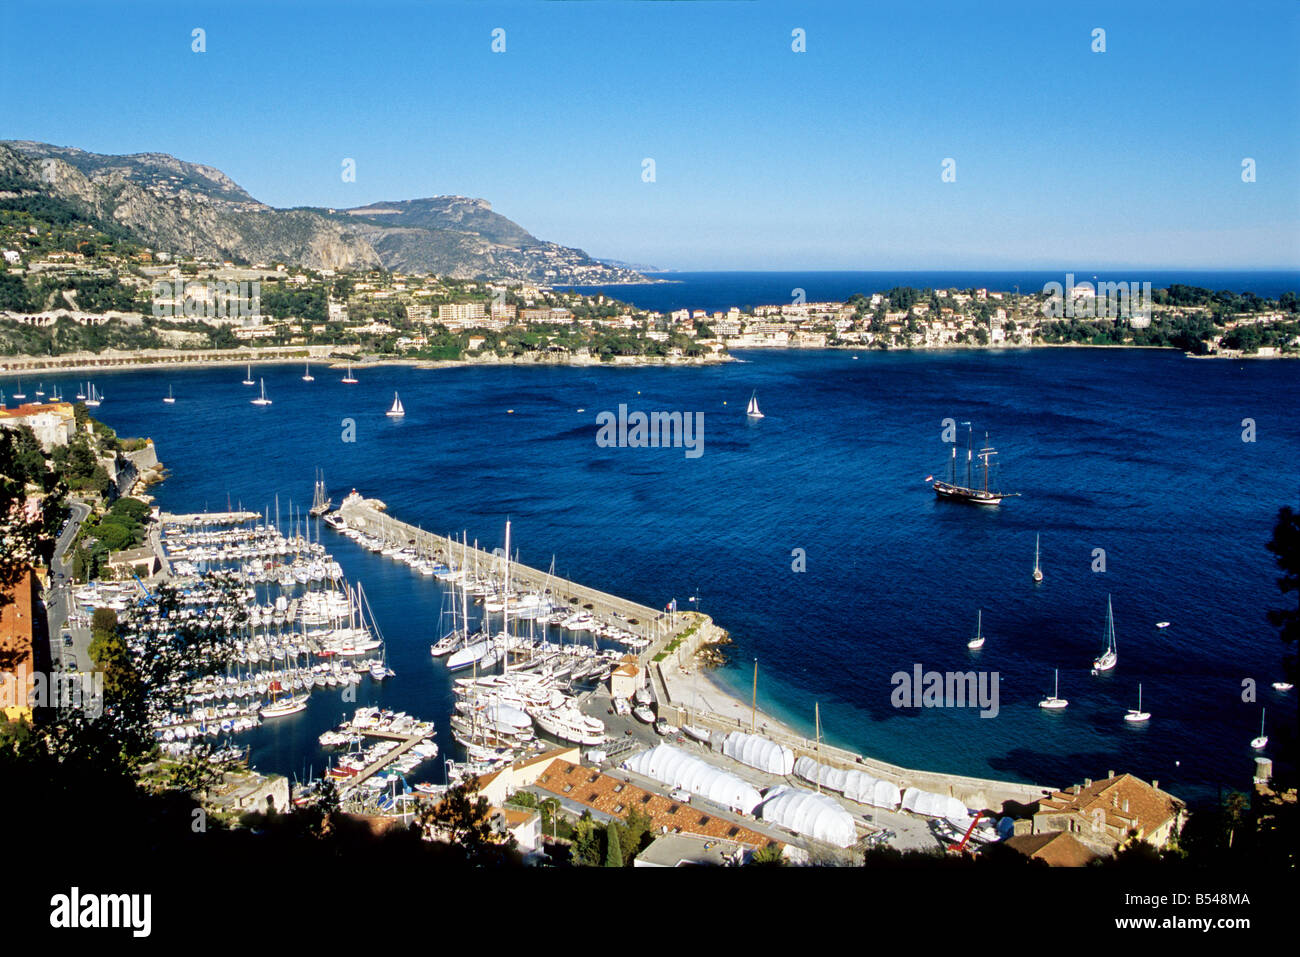 The Darse harbour Villefranche sur mer Alpes-MAritimes 06 French Riviera Cote d'azur PACA France Europe Stock Photo